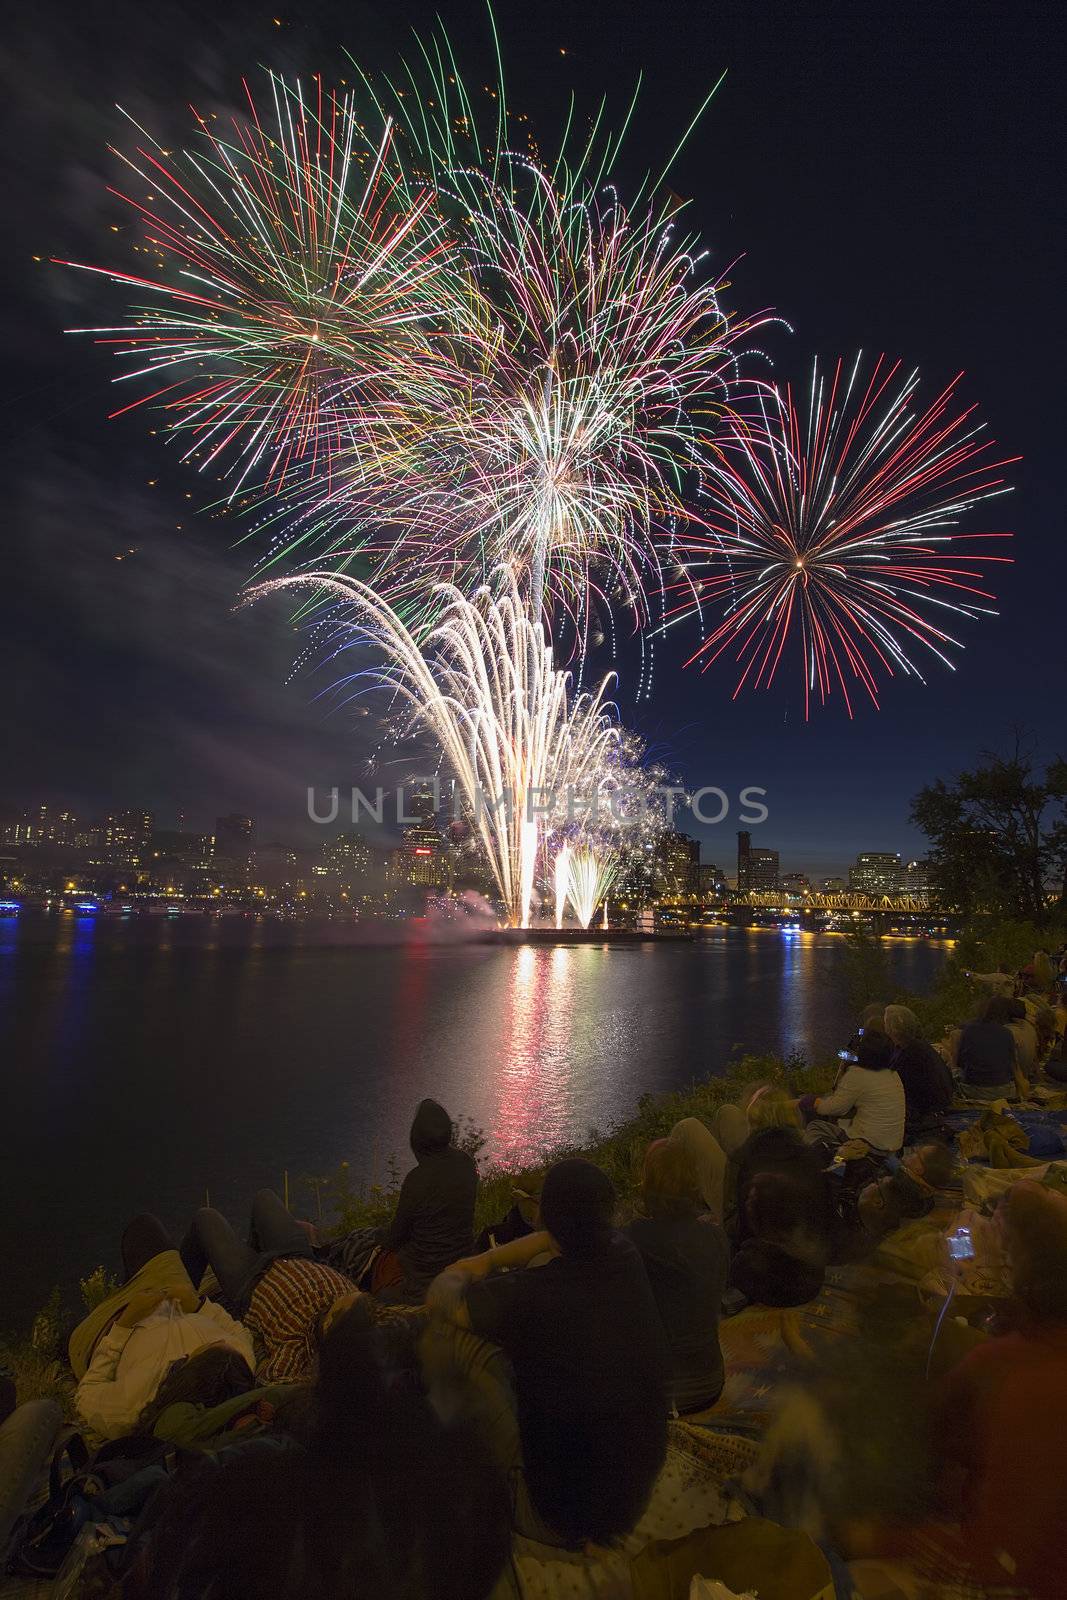 People Watching Fireworks by the River in Portland Oregon Vertic by jpldesigns